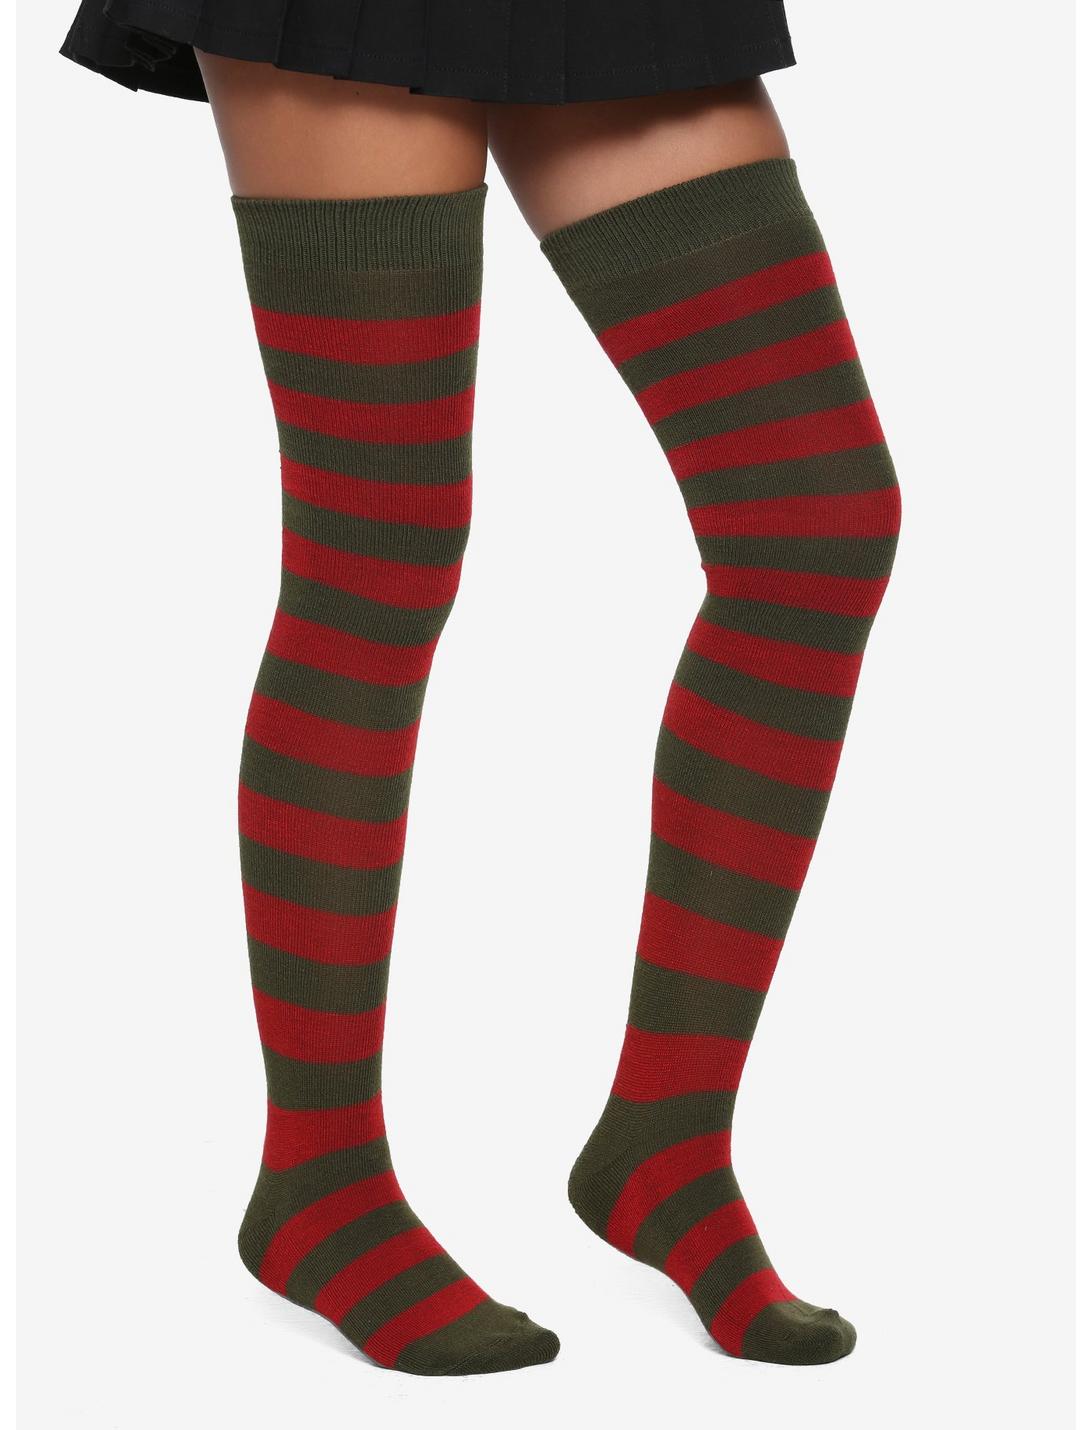 Green & Red Striped Over-The-Knee Socks, , hi-res